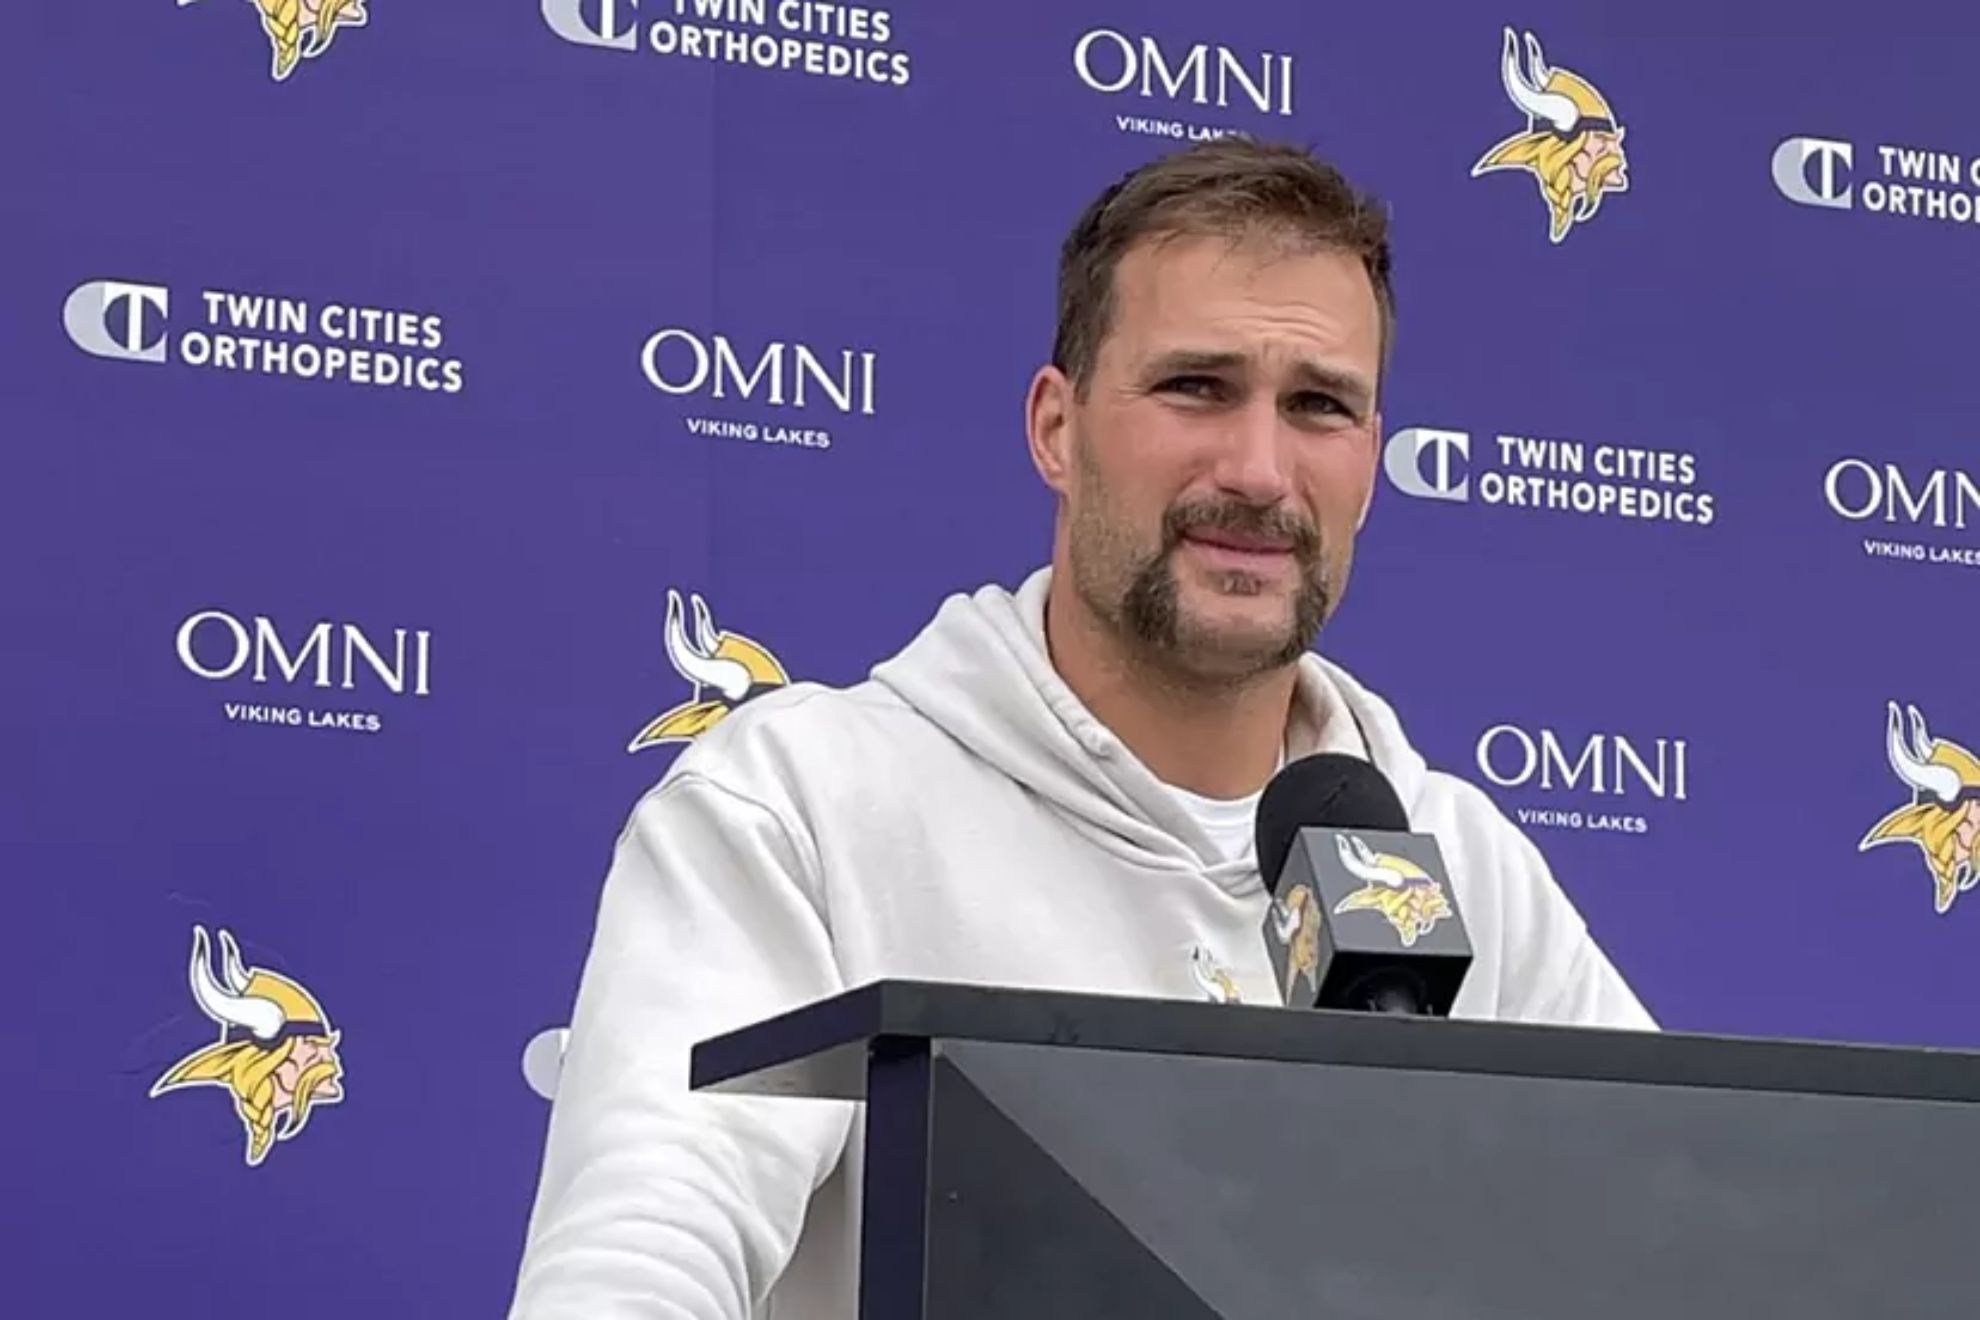 Kirk Cousins (QB) is sporting a new 'Hulk Hogan' moustache. Will we see the best year yet from the Minnesota Vikings quarterback?